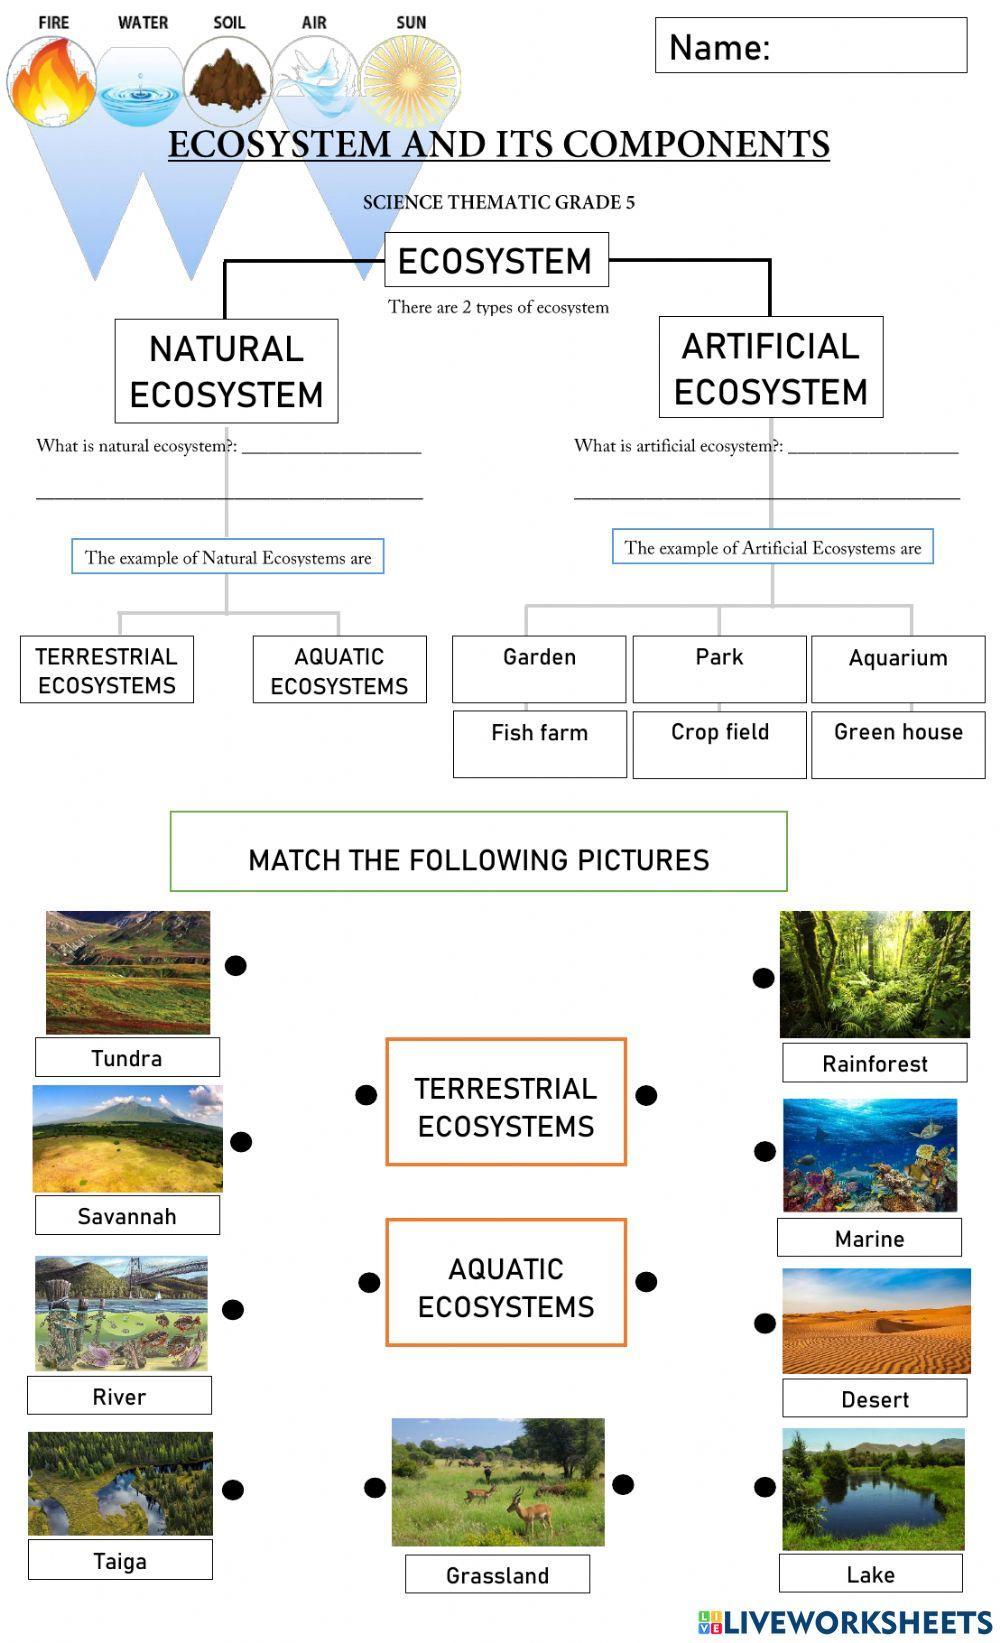 Ecosystem and its components